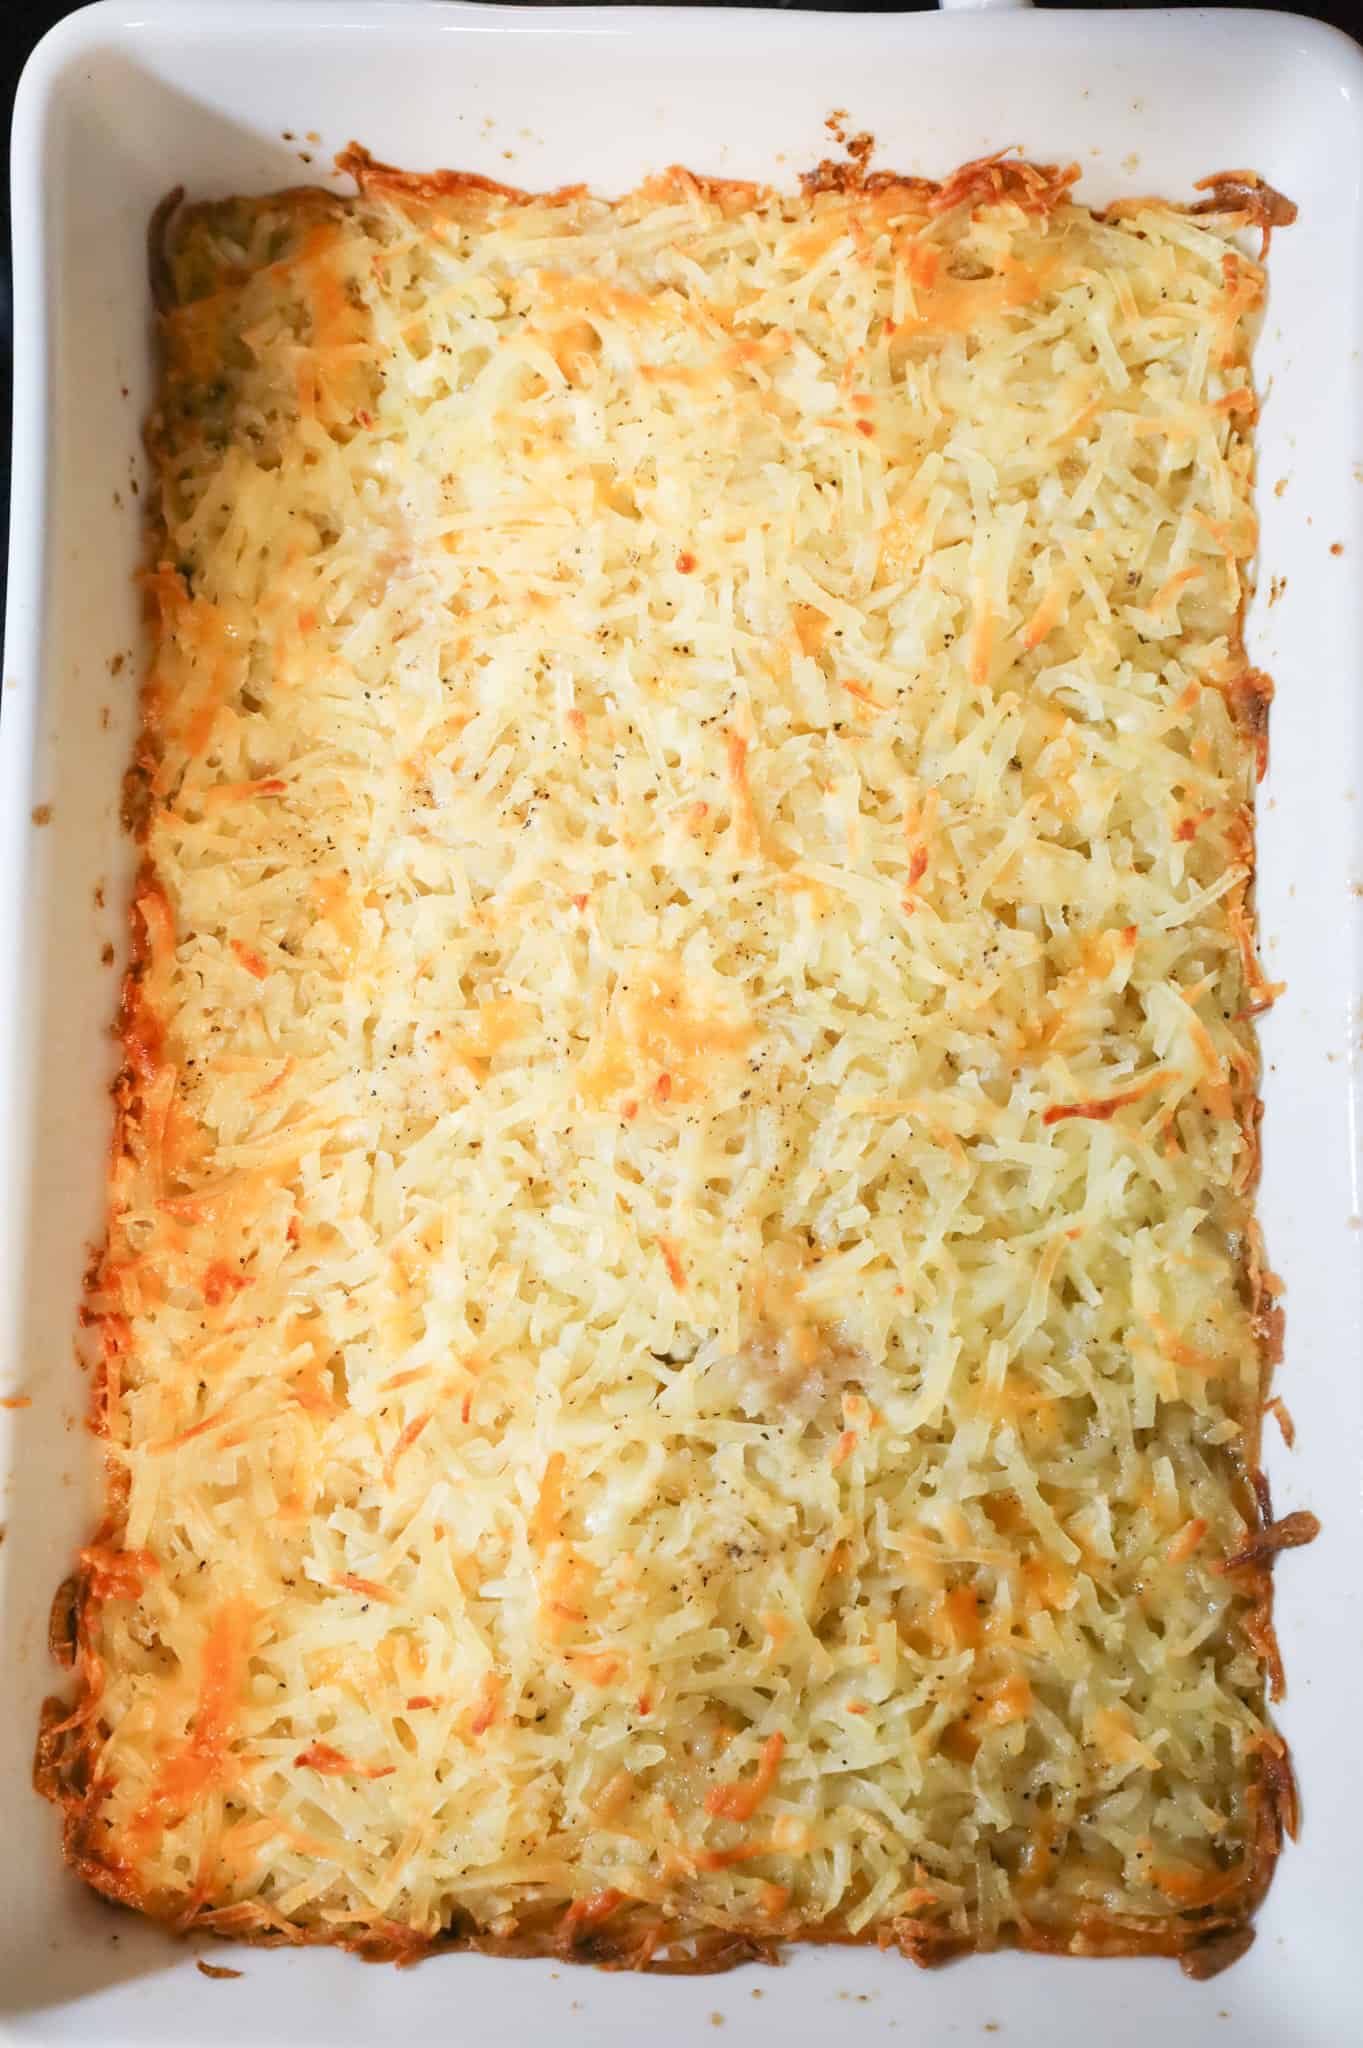 shredded hashbrown casserole after baking